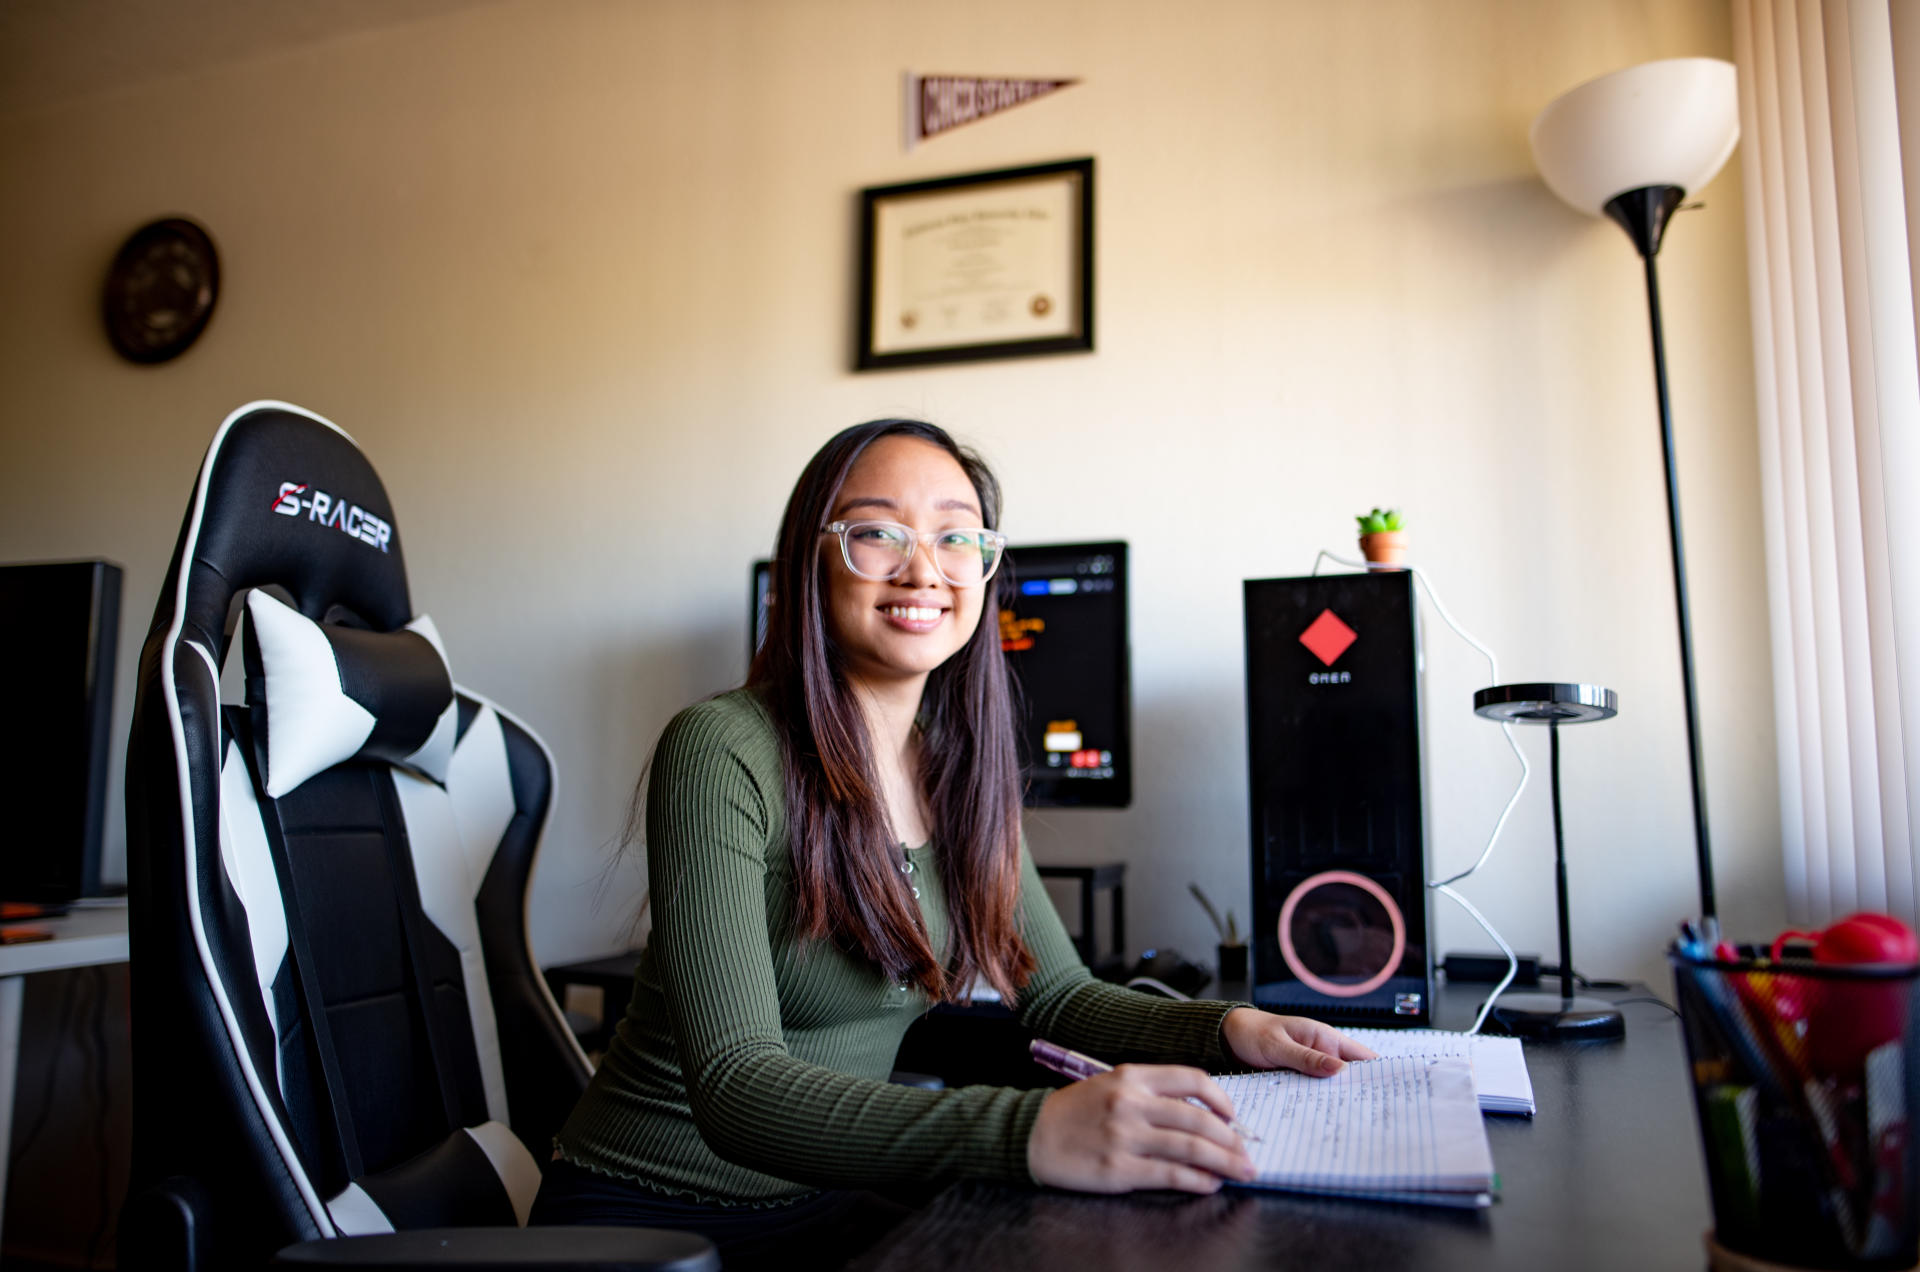 Portrait of a student seated at a desk in her home, surrounded by electronic equipment.